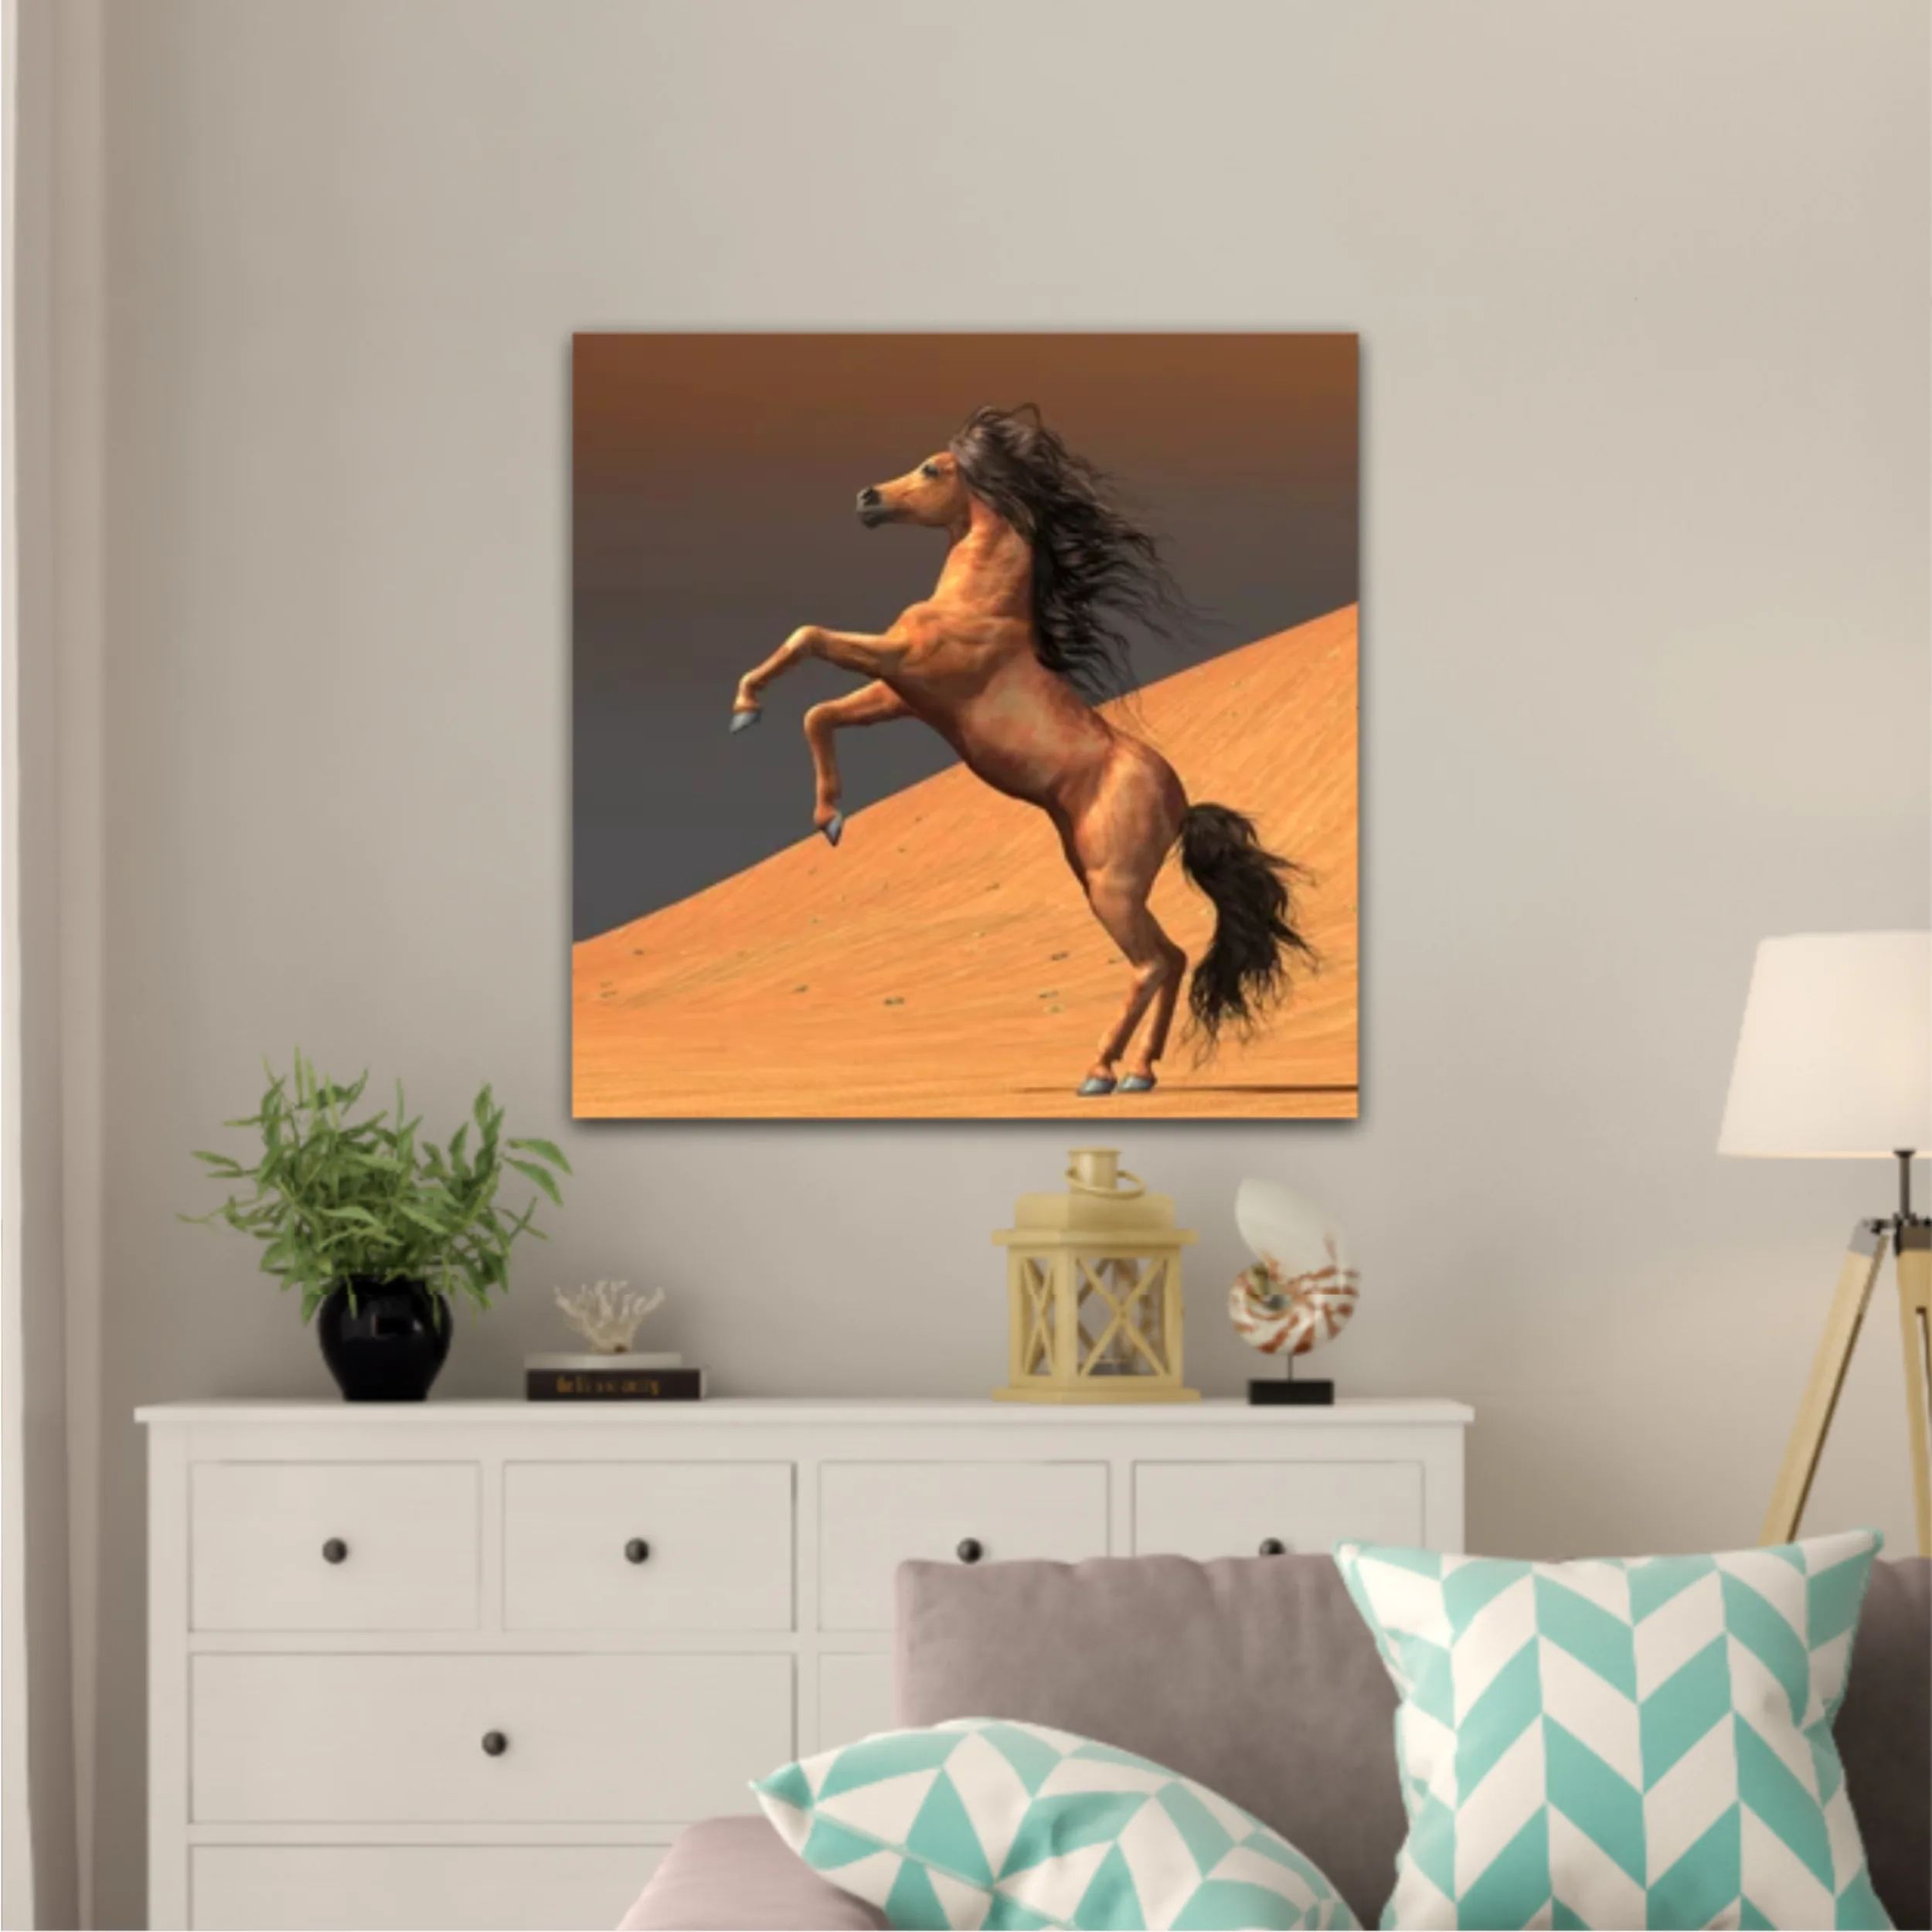 3d illustration of horses and beach design